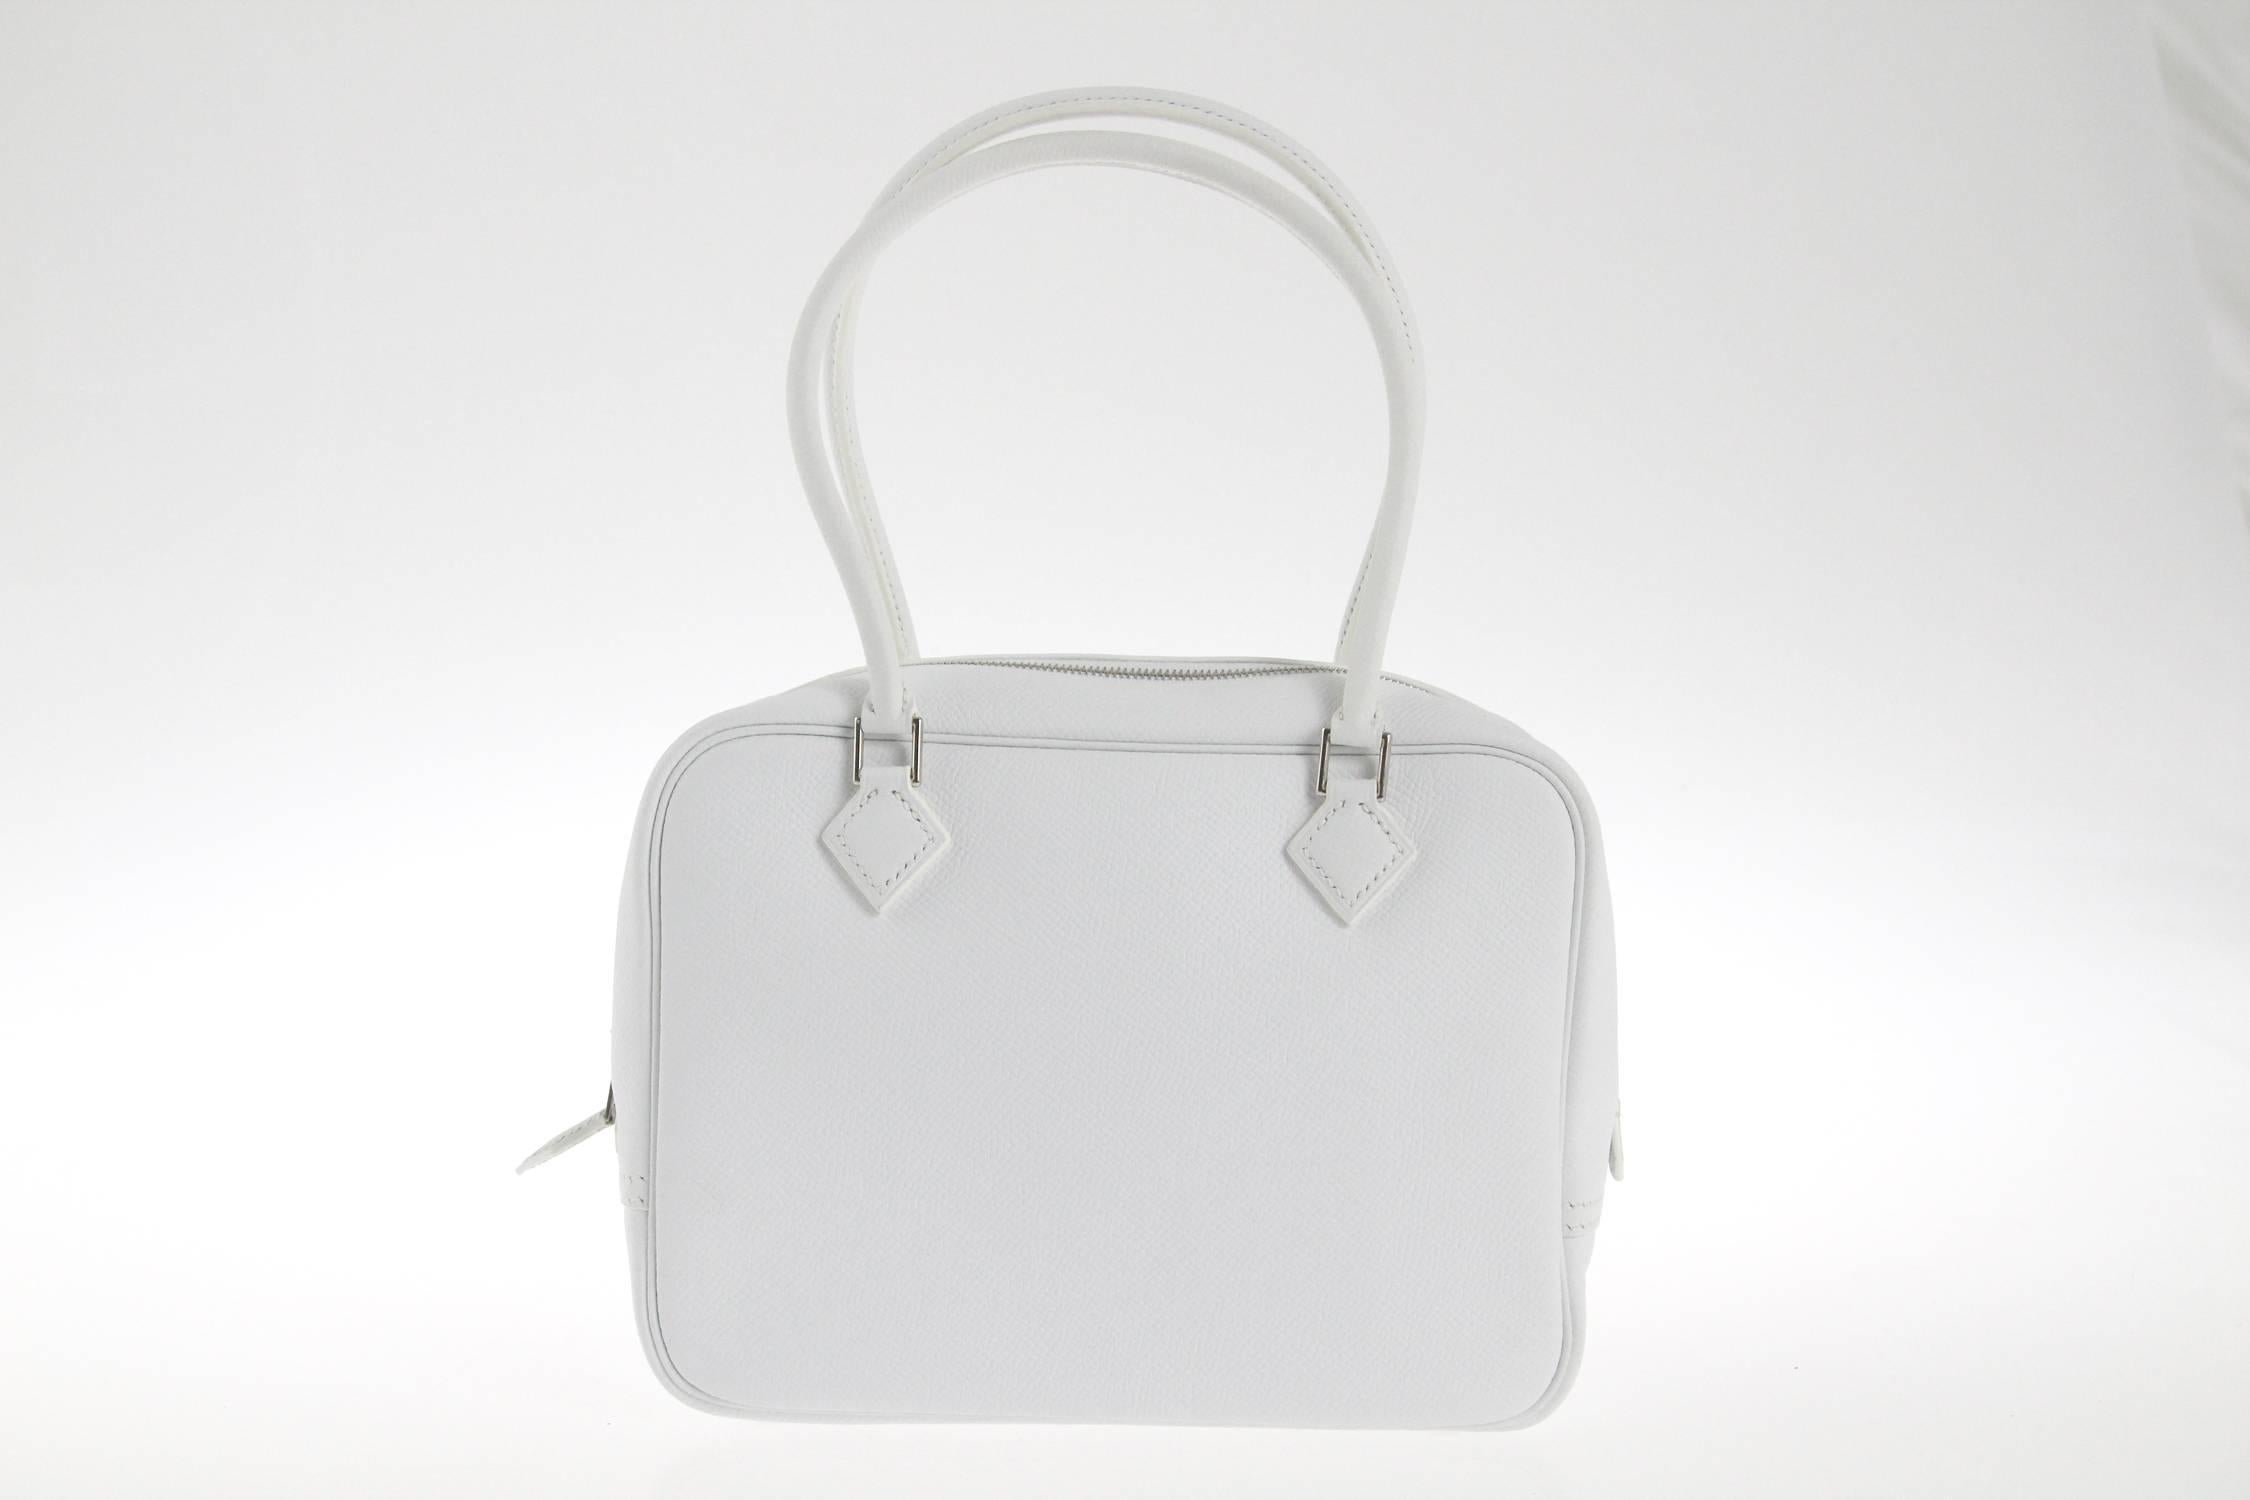 As new "Plume" handbag by Hermès, in excellent conditions.
Optic white leather, silver hardware and two top handles.
The item comes with original rain protection.

Measurements:
(approx) 20 cm x 15 x 7 cm.